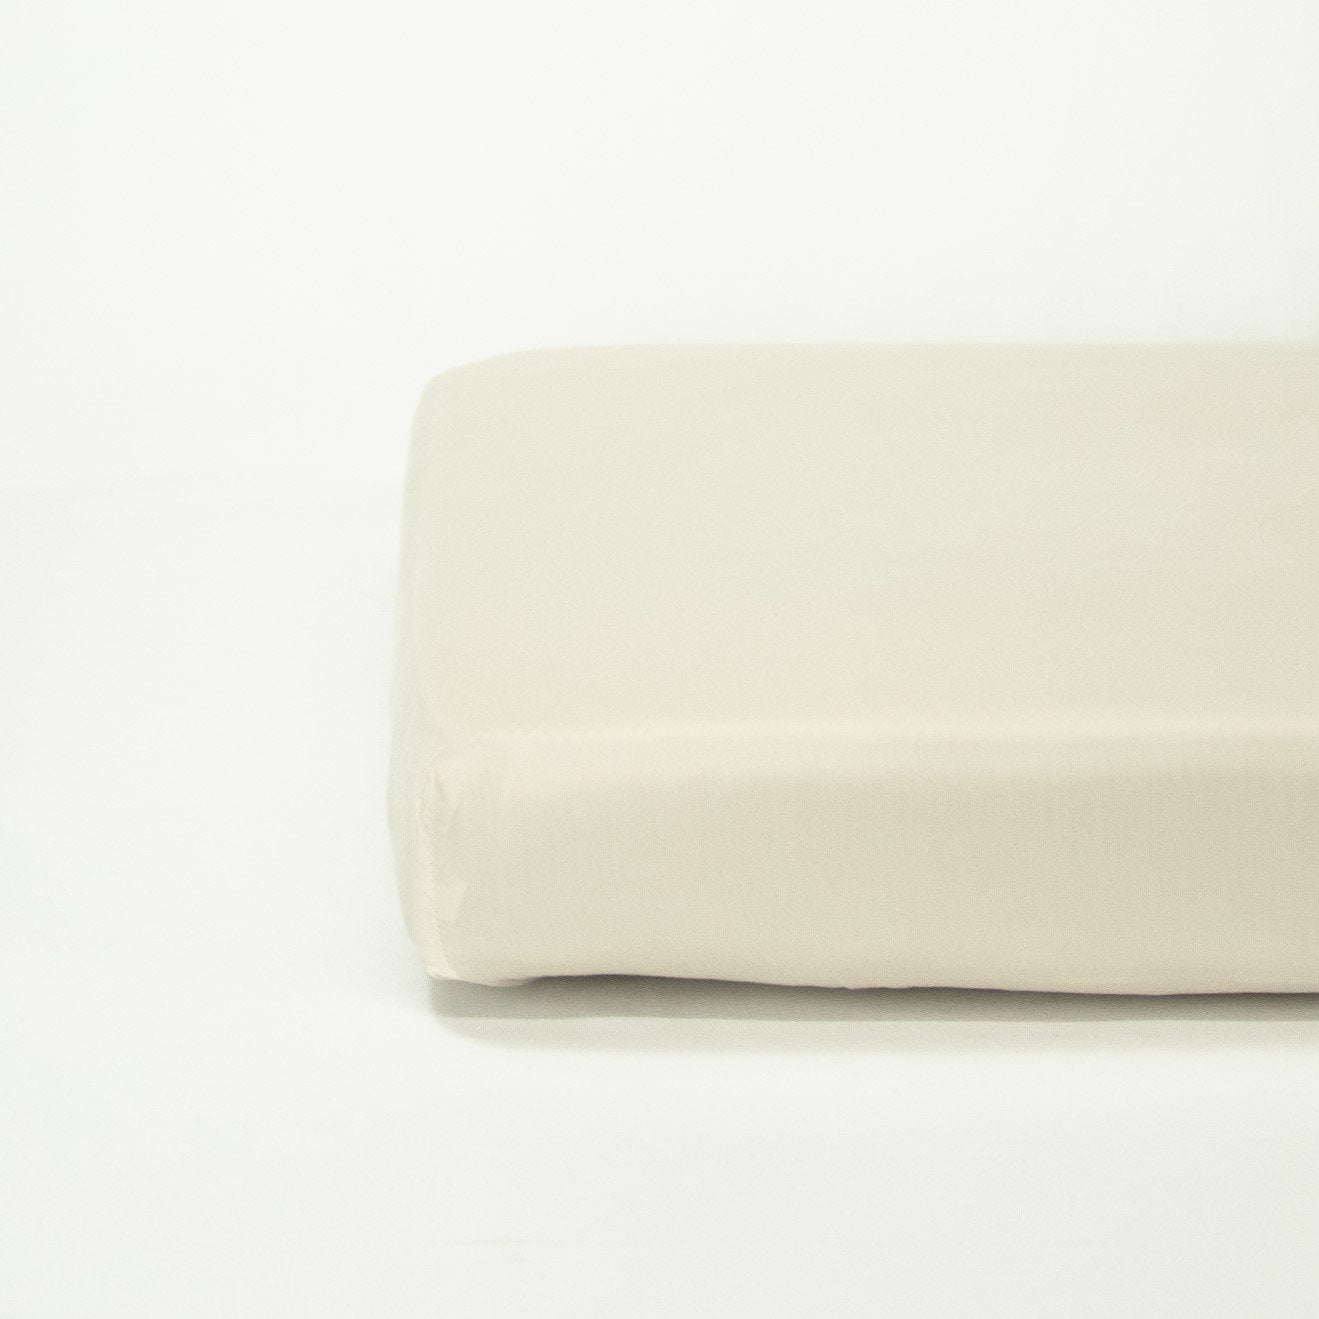 End of mattress with organic cotton fitted cot sheet in egg shell white